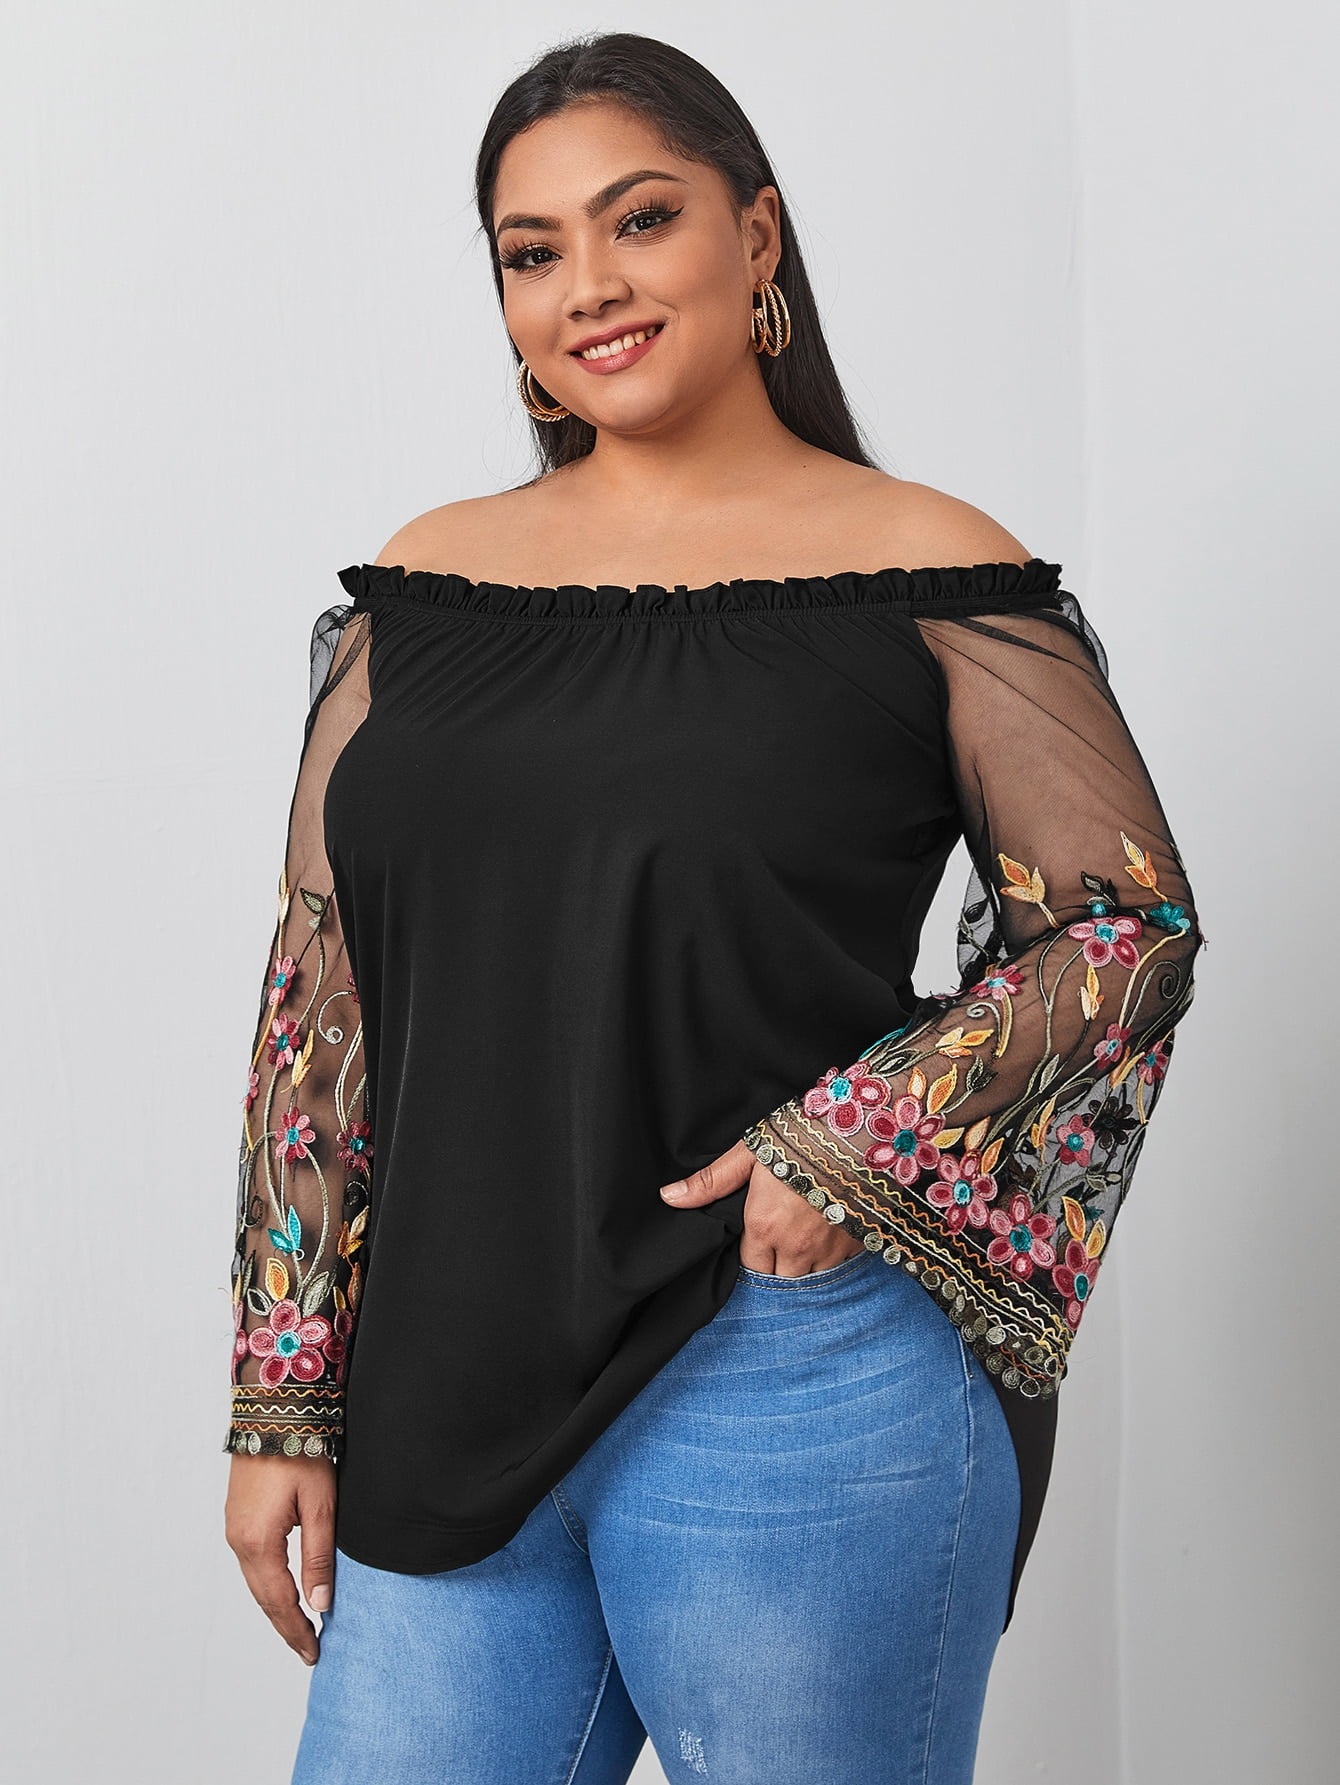 New Womens Top Plus Size Ladies Floral Lace Gypsy Style Frill Off Shoulder Tunic 